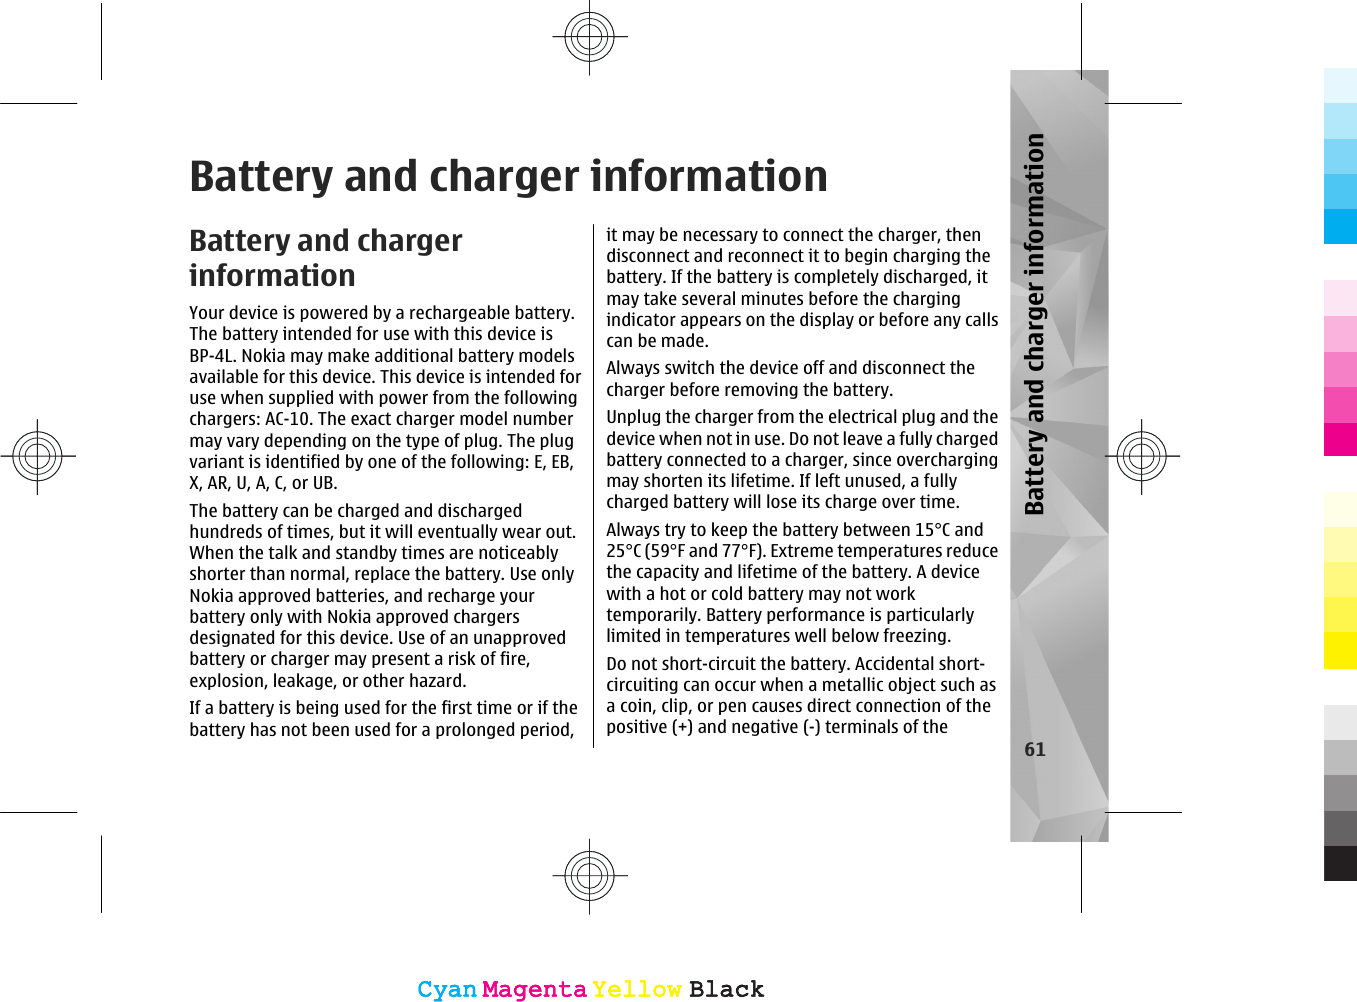 Battery and charger informationBattery and chargerinformationYour device is powered by a rechargeable battery.The battery intended for use with this device isBP-4L. Nokia may make additional battery modelsavailable for this device. This device is intended foruse when supplied with power from the followingchargers: AC-10. The exact charger model numbermay vary depending on the type of plug. The plugvariant is identified by one of the following: E, EB,X, AR, U, A, C, or UB.The battery can be charged and dischargedhundreds of times, but it will eventually wear out.When the talk and standby times are noticeablyshorter than normal, replace the battery. Use onlyNokia approved batteries, and recharge yourbattery only with Nokia approved chargersdesignated for this device. Use of an unapprovedbattery or charger may present a risk of fire,explosion, leakage, or other hazard.If a battery is being used for the first time or if thebattery has not been used for a prolonged period,it may be necessary to connect the charger, thendisconnect and reconnect it to begin charging thebattery. If the battery is completely discharged, itmay take several minutes before the chargingindicator appears on the display or before any callscan be made.Always switch the device off and disconnect thecharger before removing the battery.Unplug the charger from the electrical plug and thedevice when not in use. Do not leave a fully chargedbattery connected to a charger, since overchargingmay shorten its lifetime. If left unused, a fullycharged battery will lose its charge over time.Always try to keep the battery between 15°C and25°C (59°F and 77°F). Extreme temperatures reducethe capacity and lifetime of the battery. A devicewith a hot or cold battery may not worktemporarily. Battery performance is particularlylimited in temperatures well below freezing.Do not short-circuit the battery. Accidental short-circuiting can occur when a metallic object such asa coin, clip, or pen causes direct connection of thepositive (+) and negative (-) terminals of the61Battery and charger informationCyanCyanMagentaMagentaYellowYellowBlackBlackCyanCyanMagentaMagentaYellowYellowBlackBlack